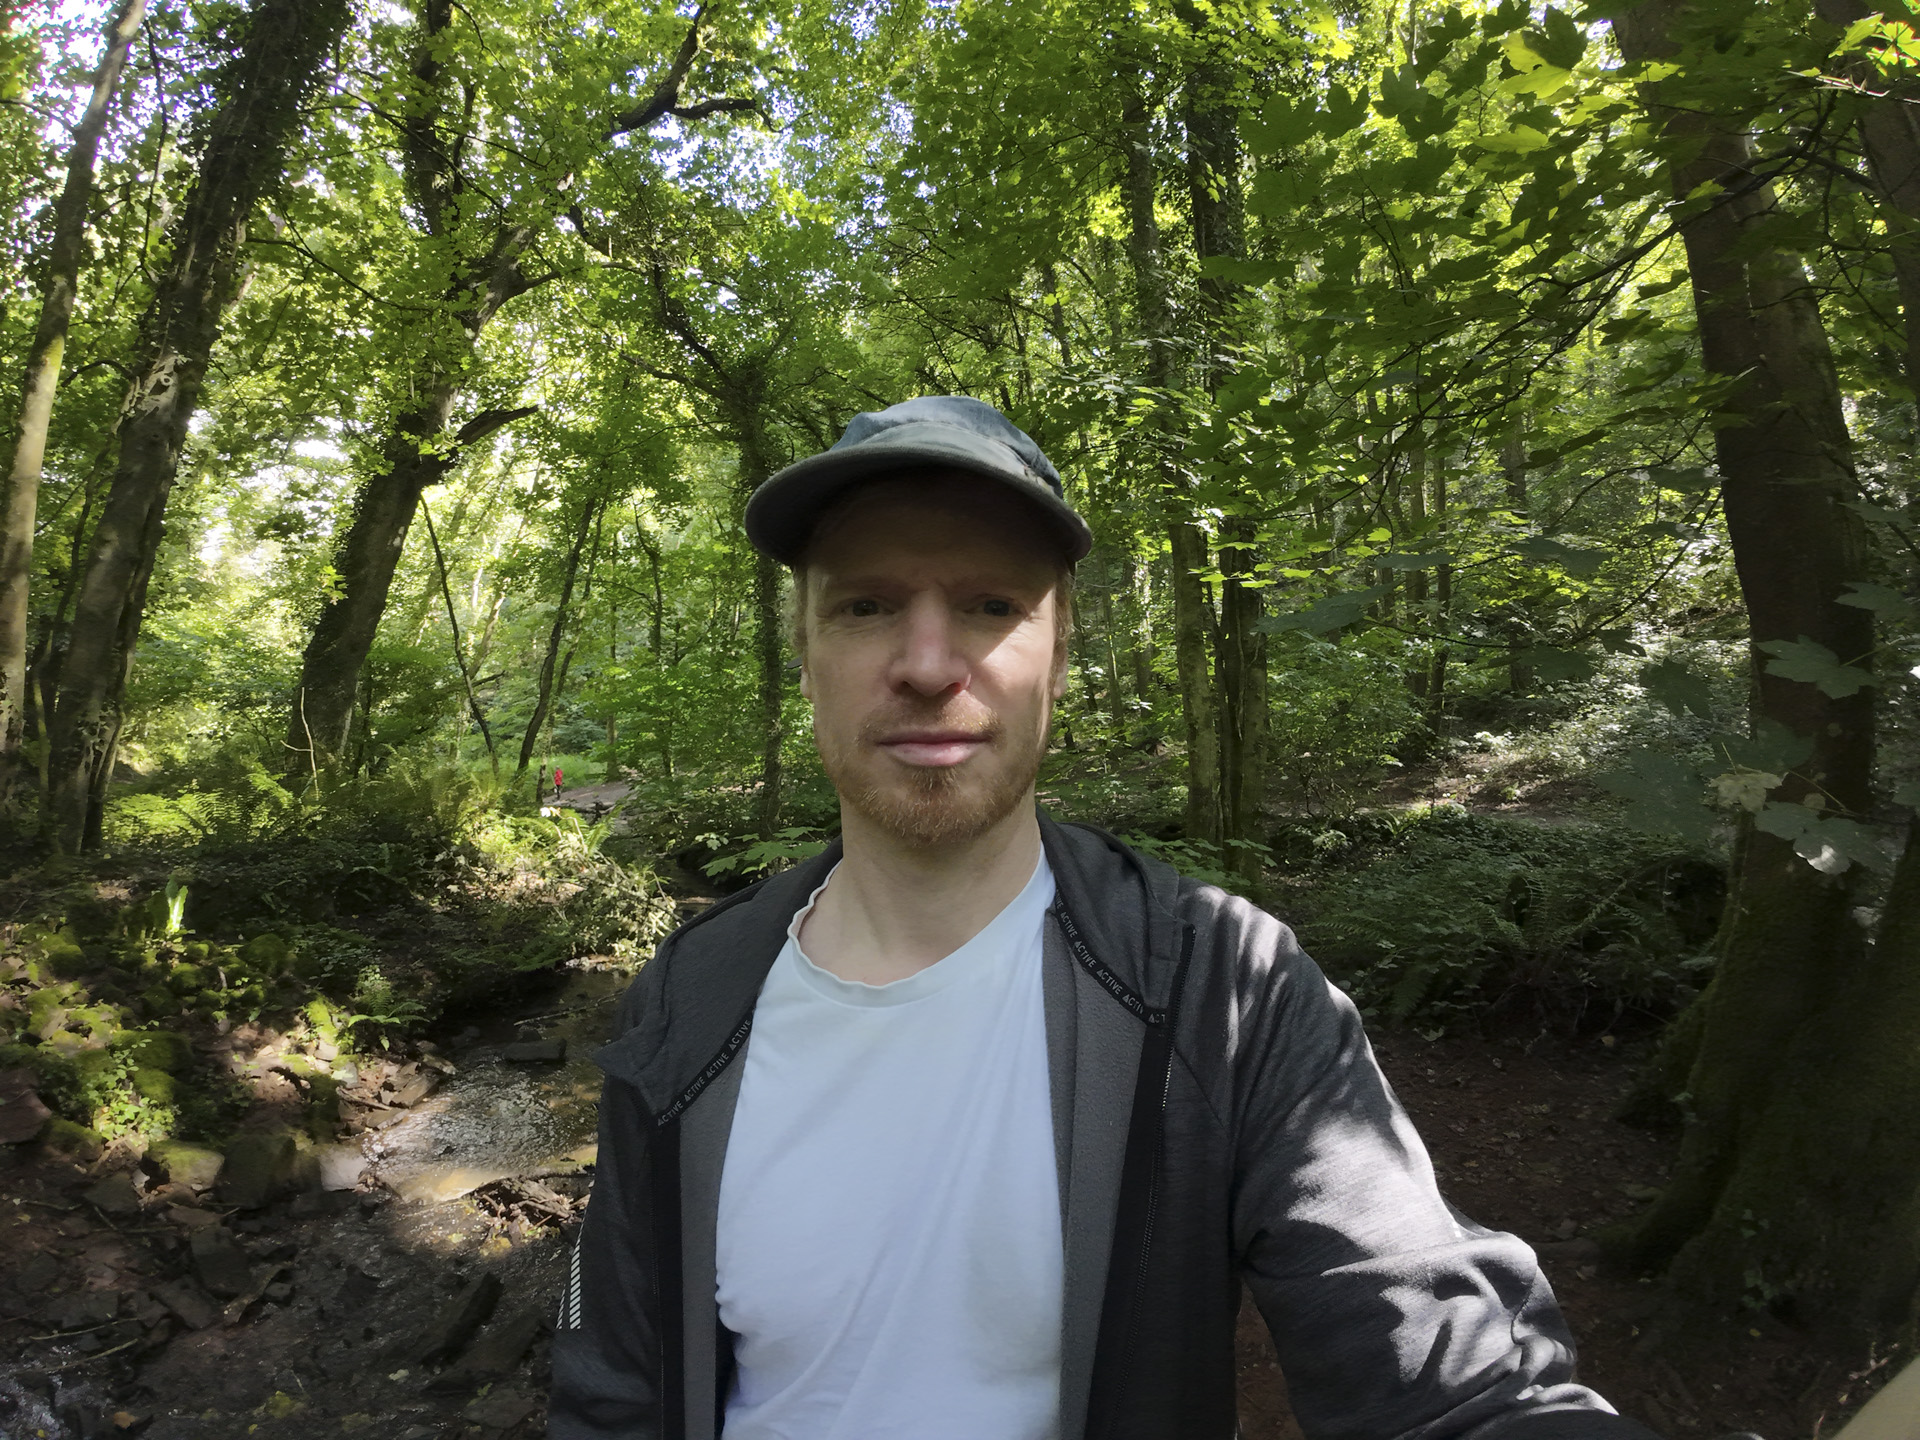 Selfie in UK Woodland in the sun and shade with ultra-wide field of view